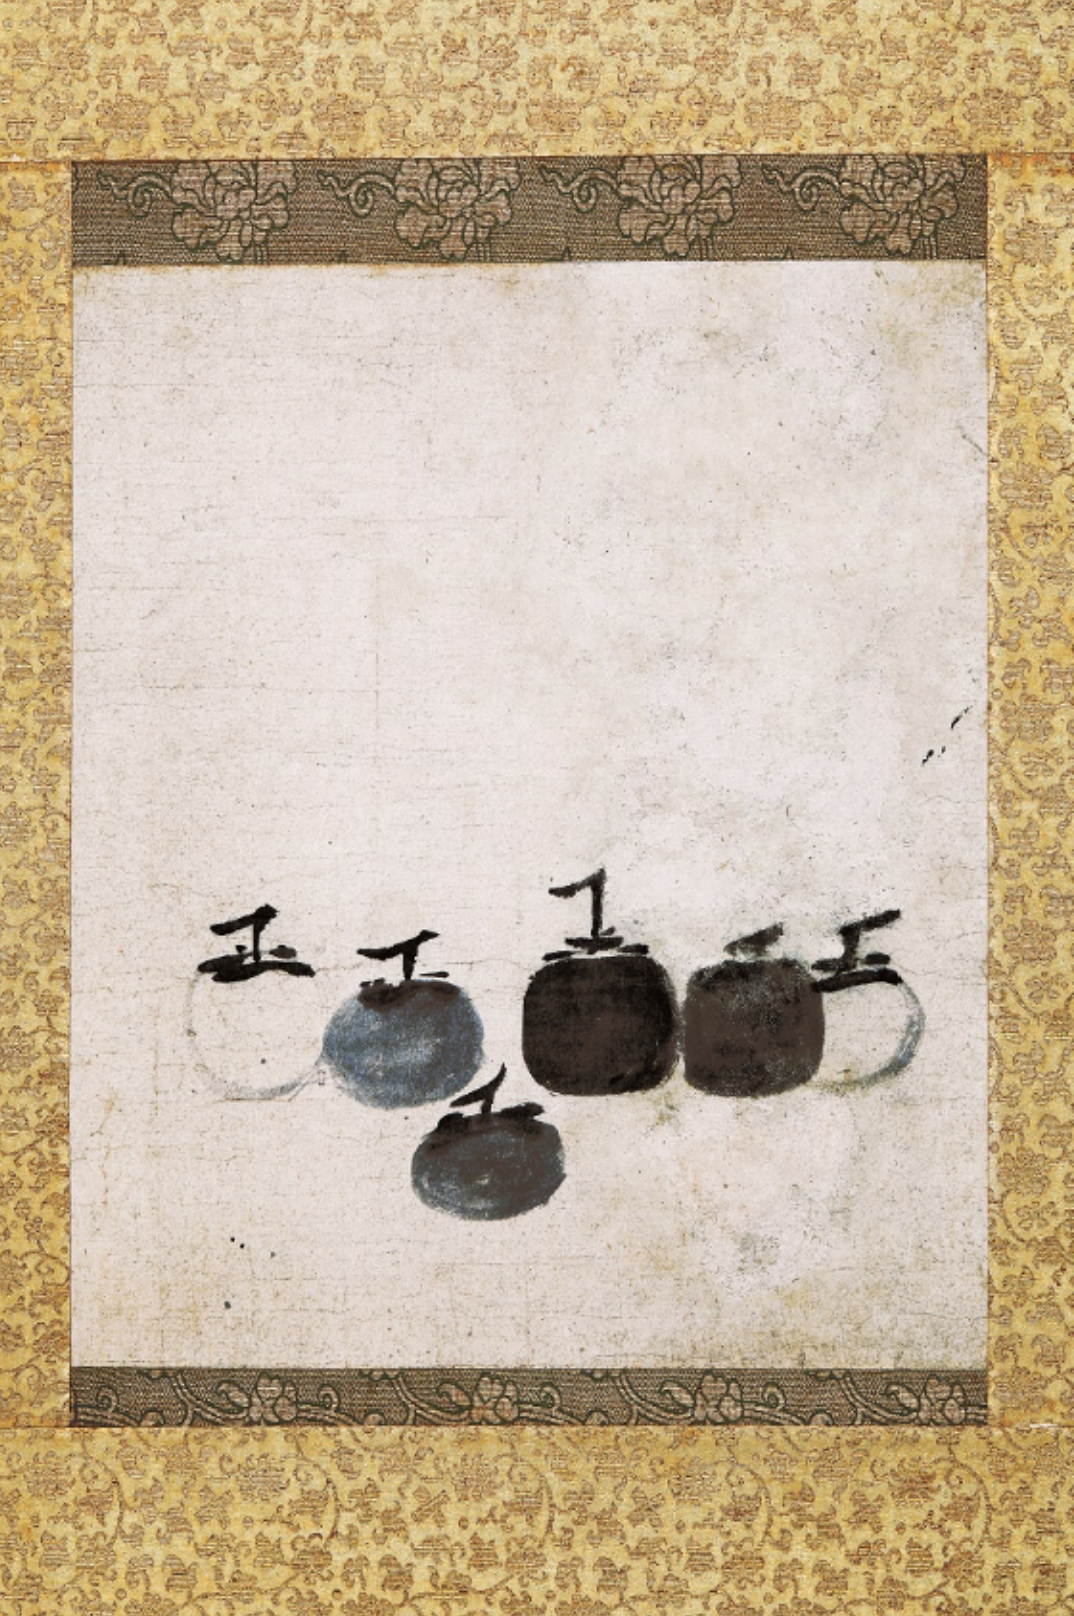 An ink and brush painting depicts a grouping of six persimmons on a scroll. 